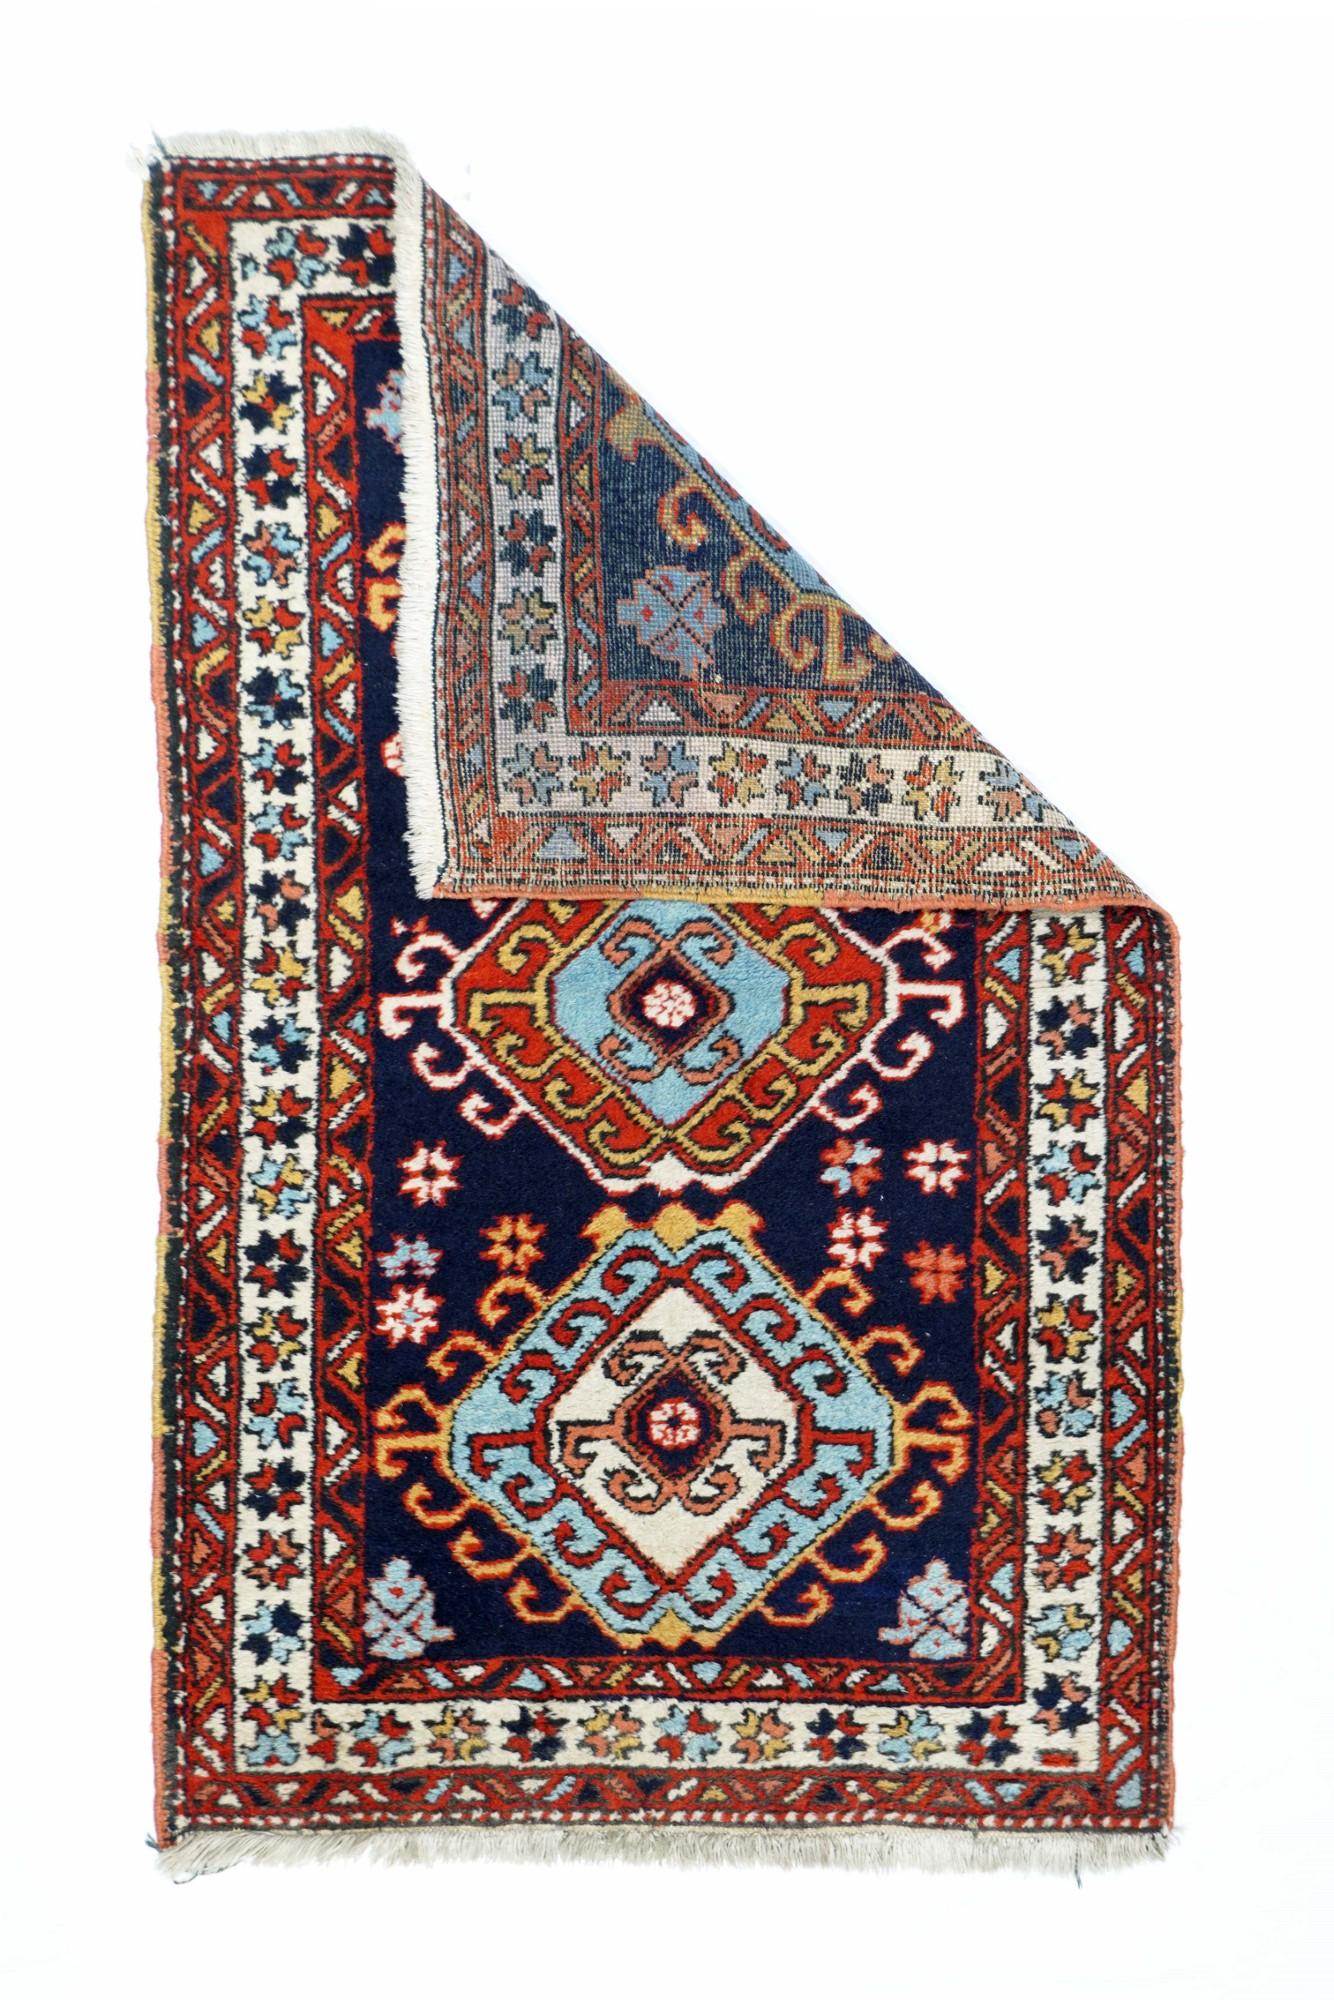 Vintage Ardebil rug 3'3'' x 4'10''. The navy field is decorated with three similar, hooked and nested octagons detailed in ecru, milky camel tan, red and pale blue. Main border of floating, polychrome stars, Triangle and diagonal bar red minors.